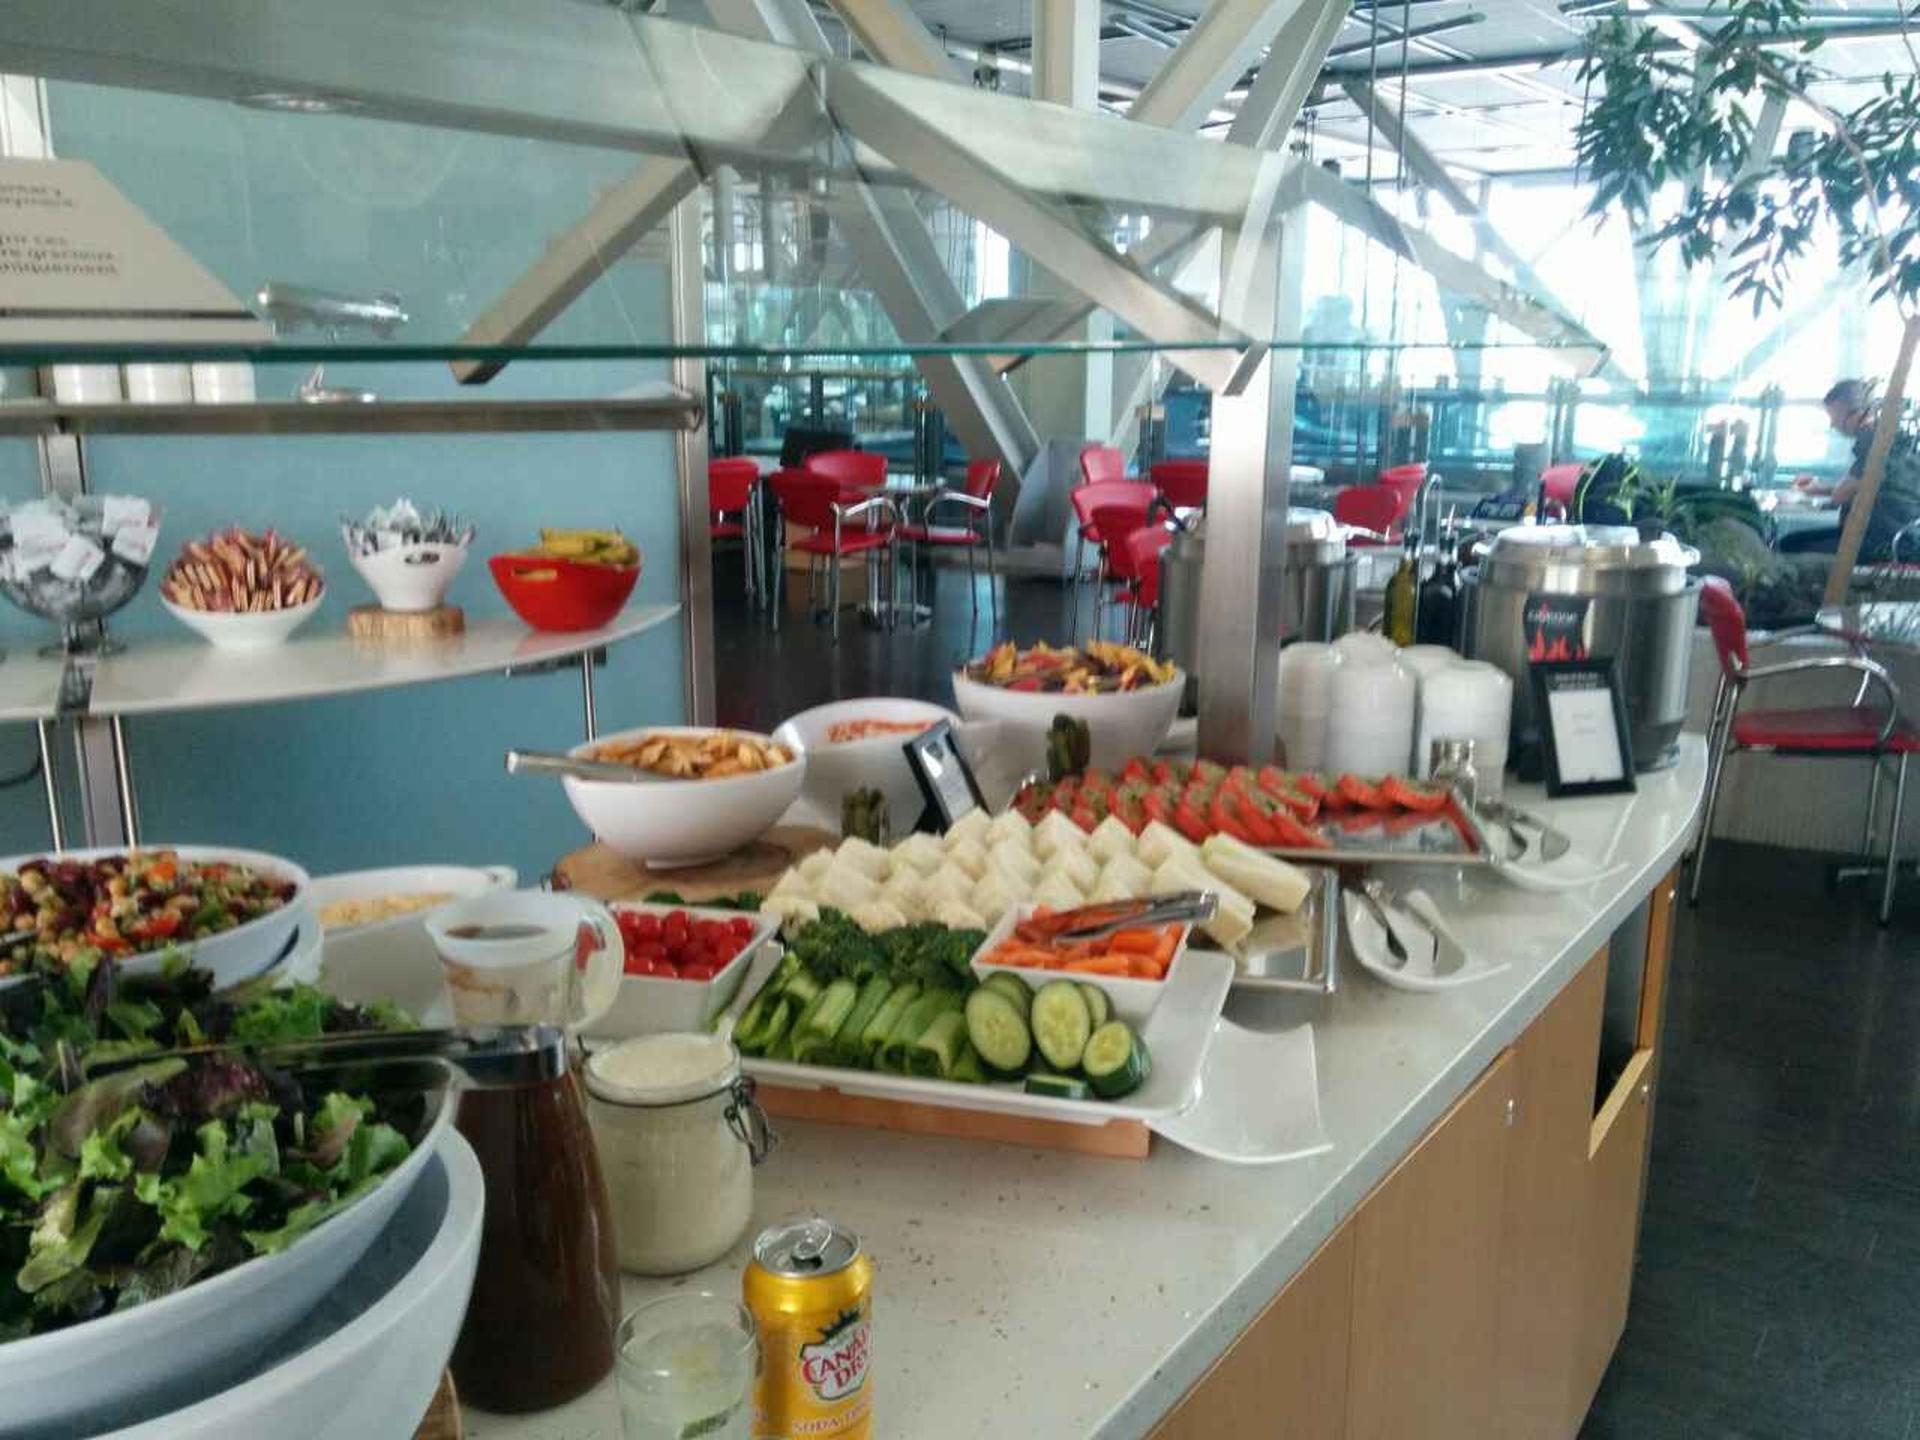 Air Canada Maple Leaf Lounge image 8 of 17